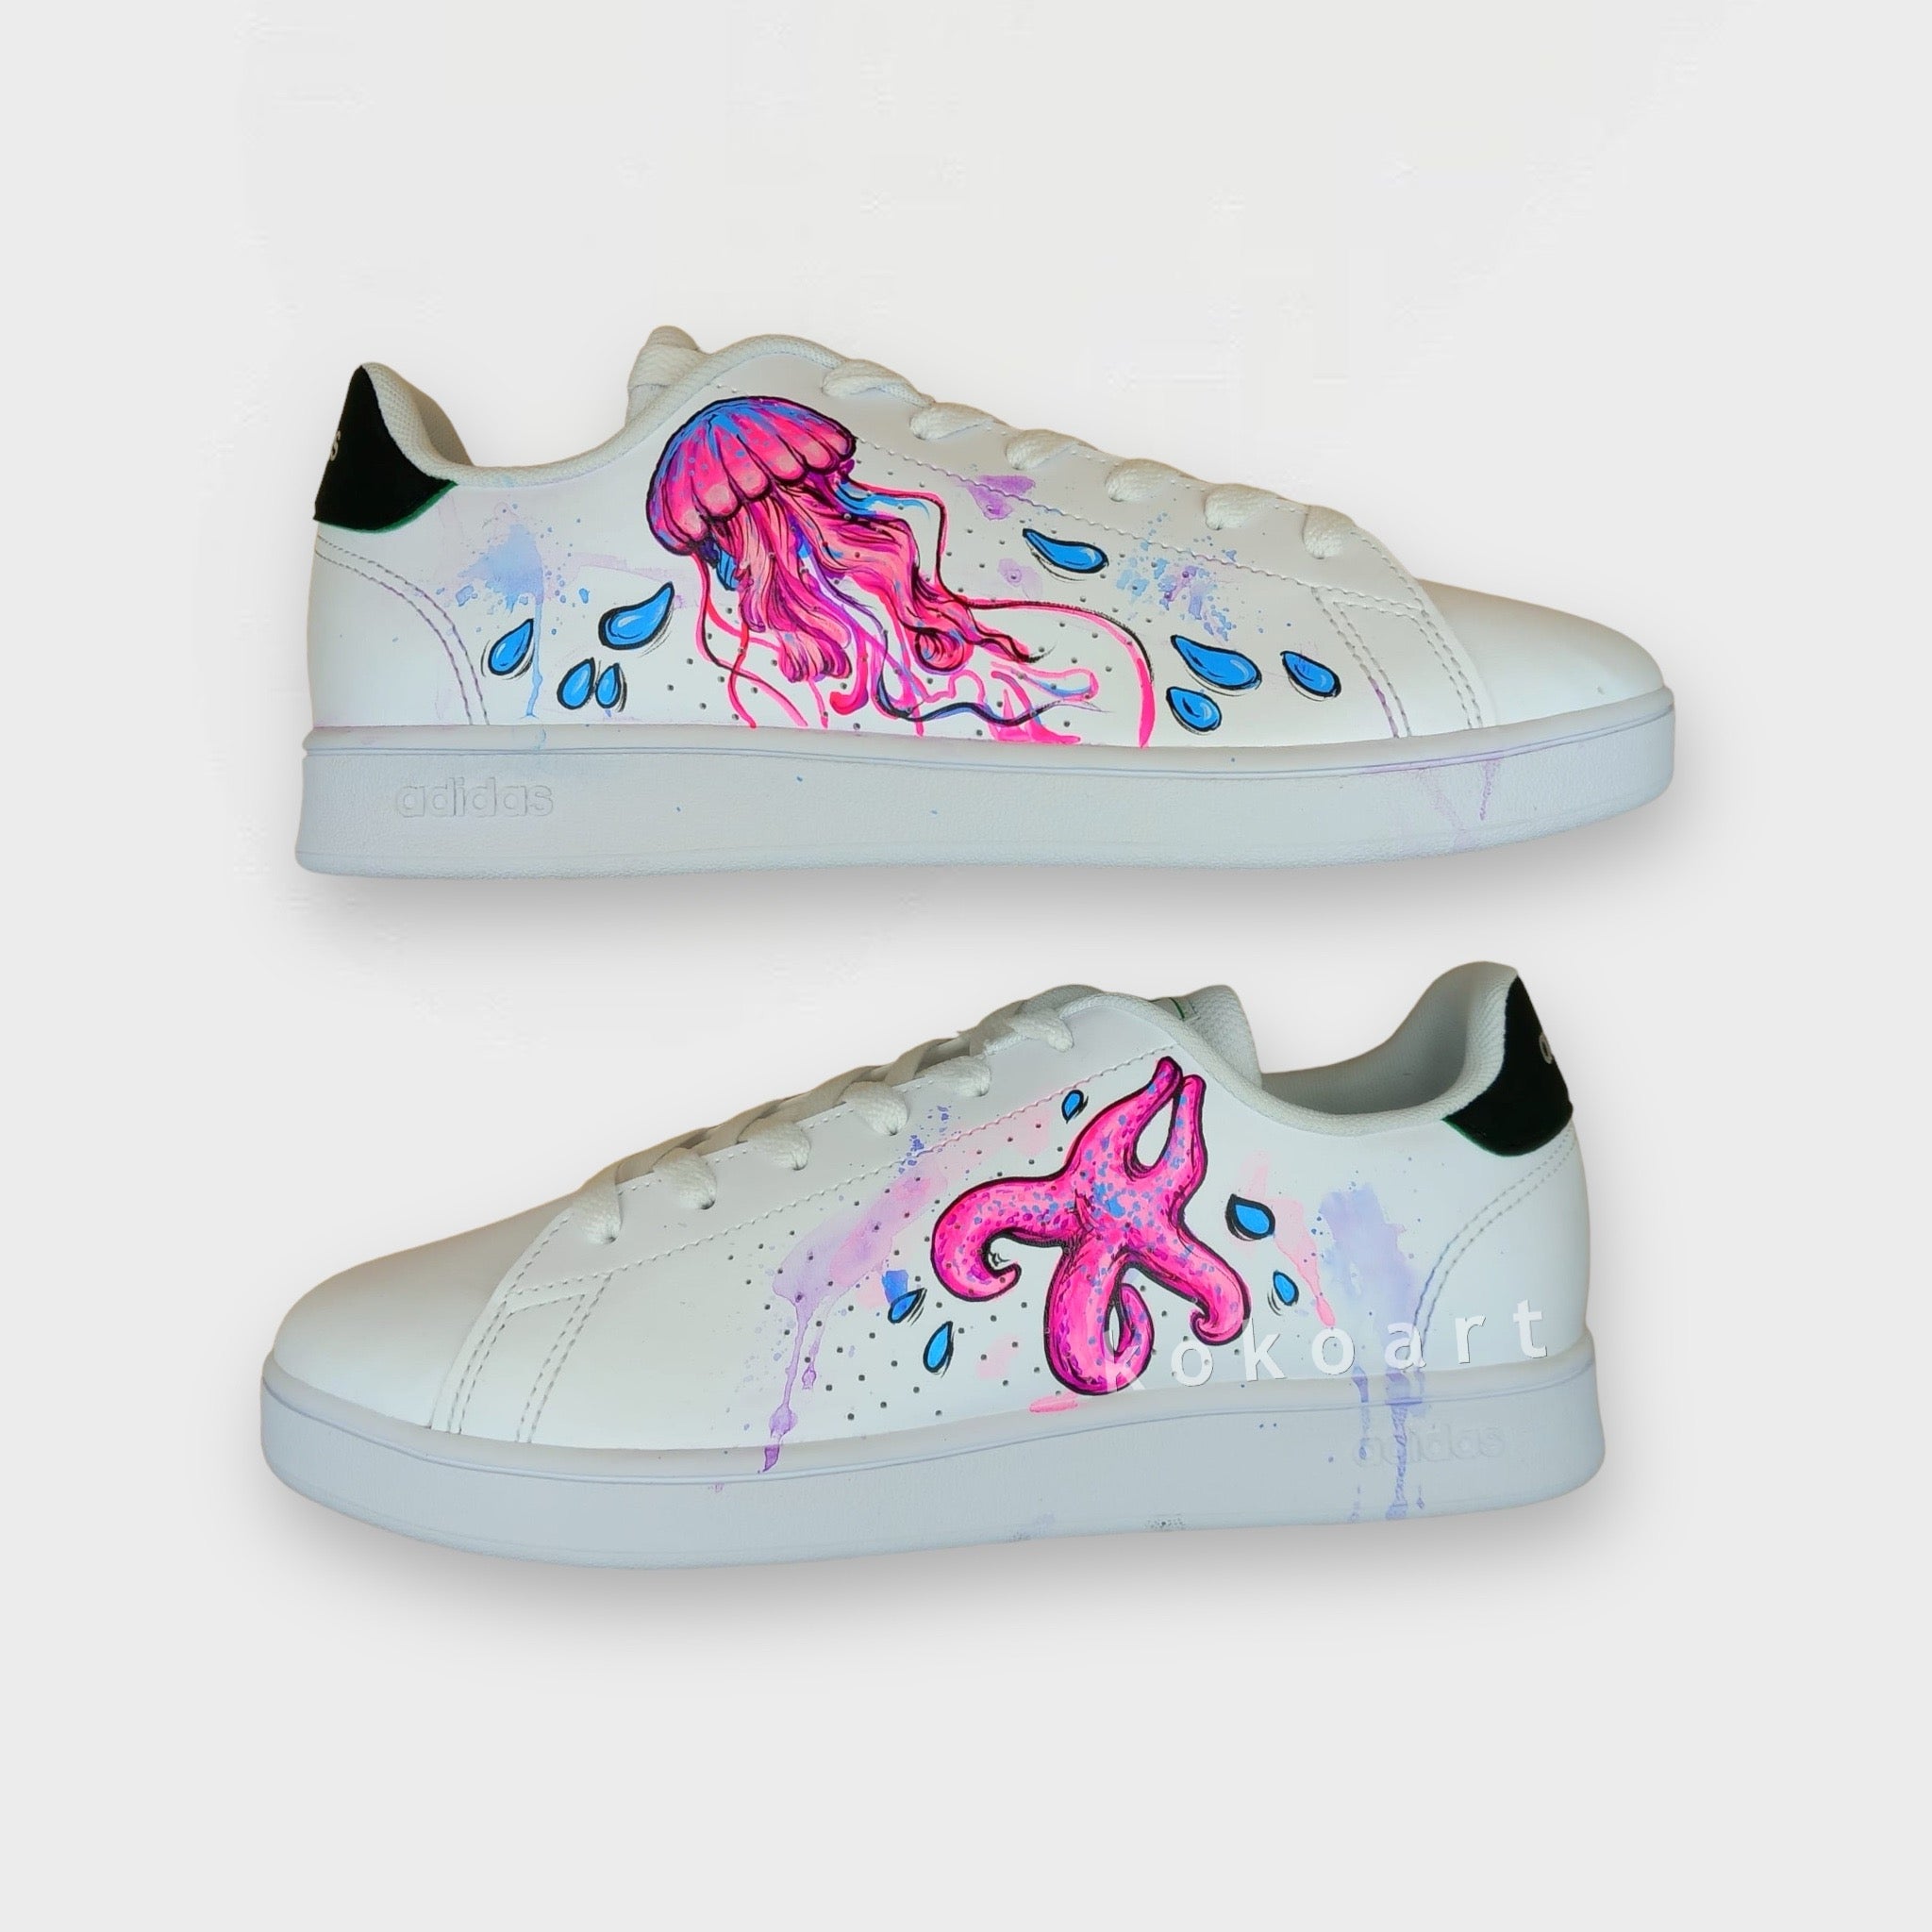 Stan Smith Hand Painted Neon Jelly Fish